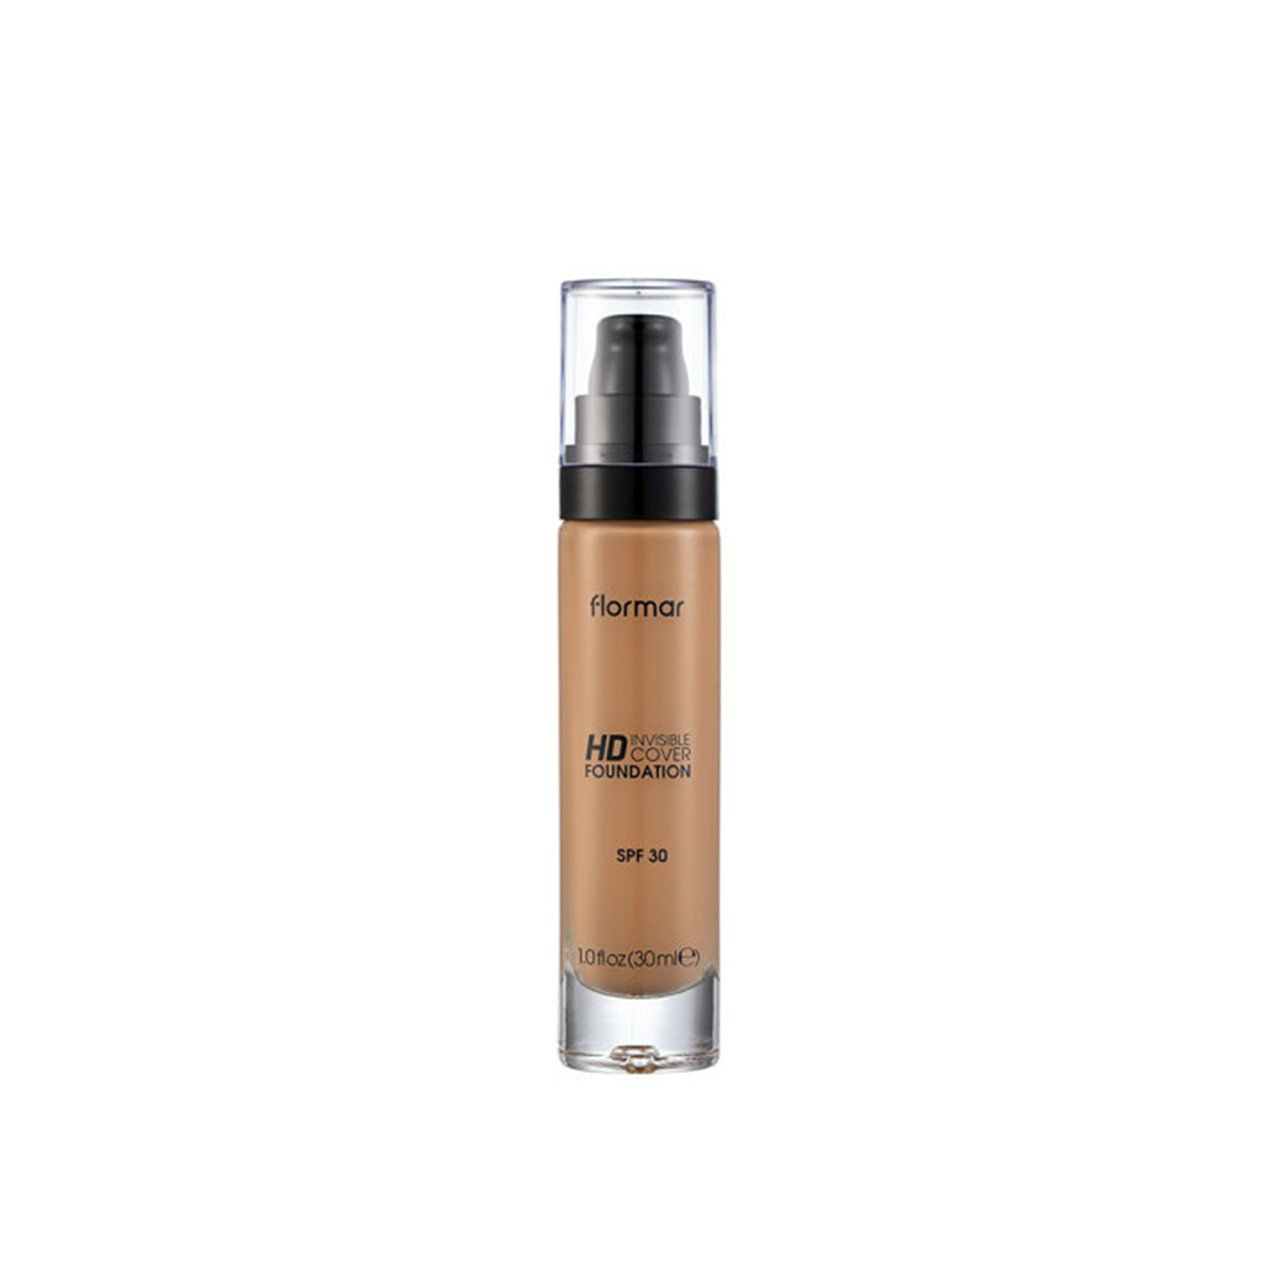 https://static.beautytocare.com/cdn-cgi/image/width=1600,height=1600,f=auto/media/catalog/product//f/l/flormar-invisible-cover-hd-foundation-spf30-110-golden-beige-30ml_1.jpg